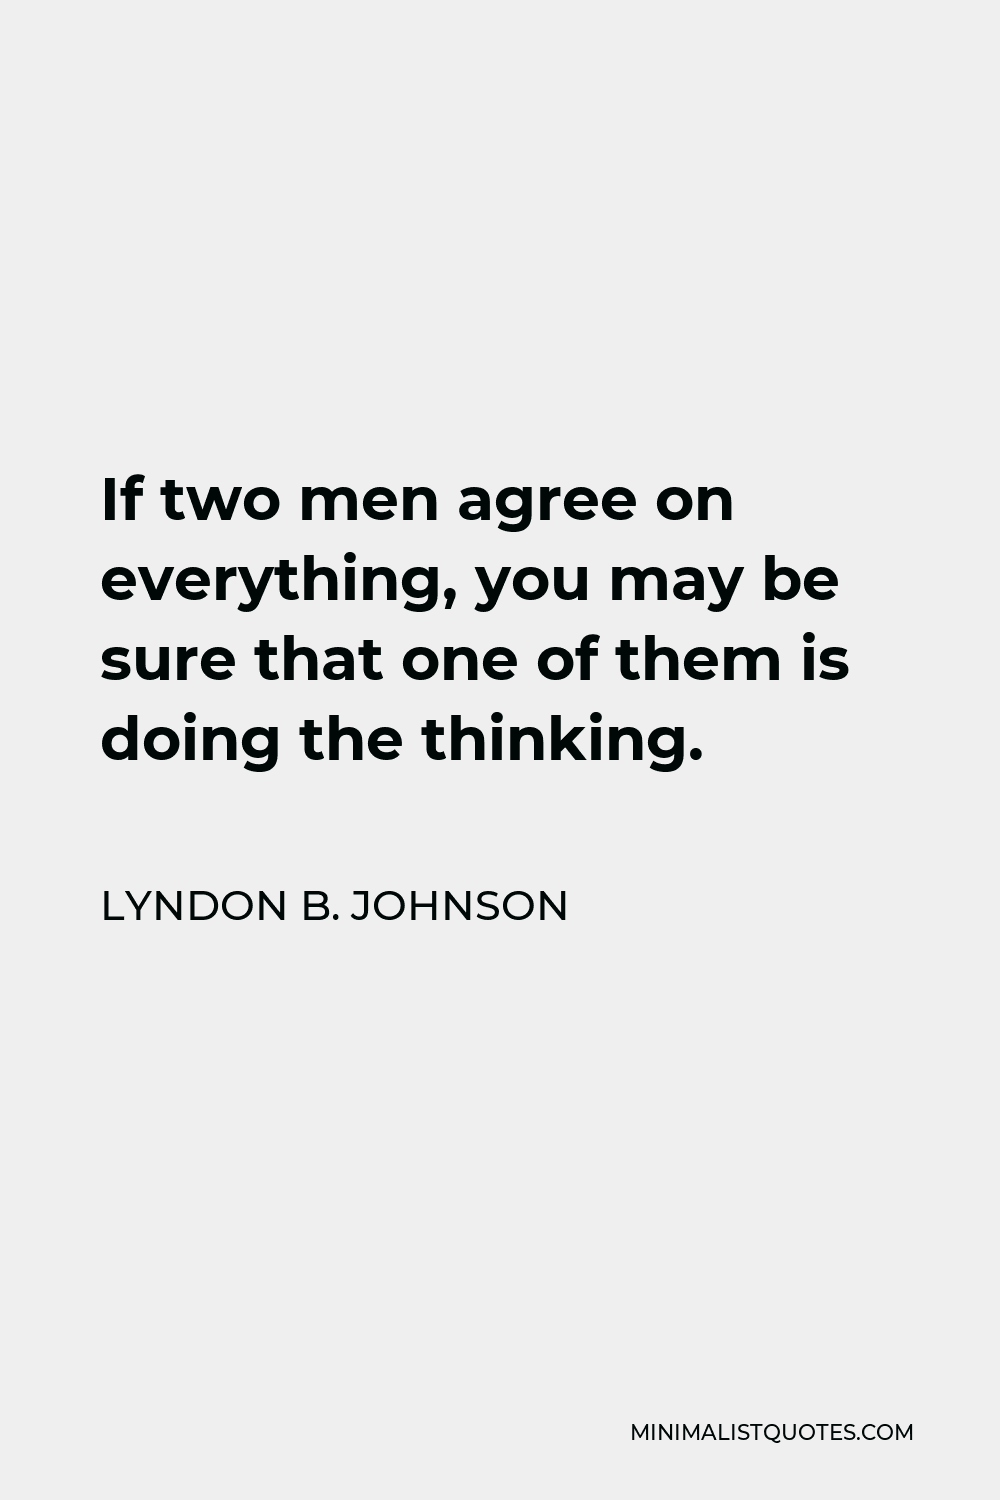 Lyndon B. Johnson Quote - If two men agree on everything, you may be sure that one of them is doing the thinking.